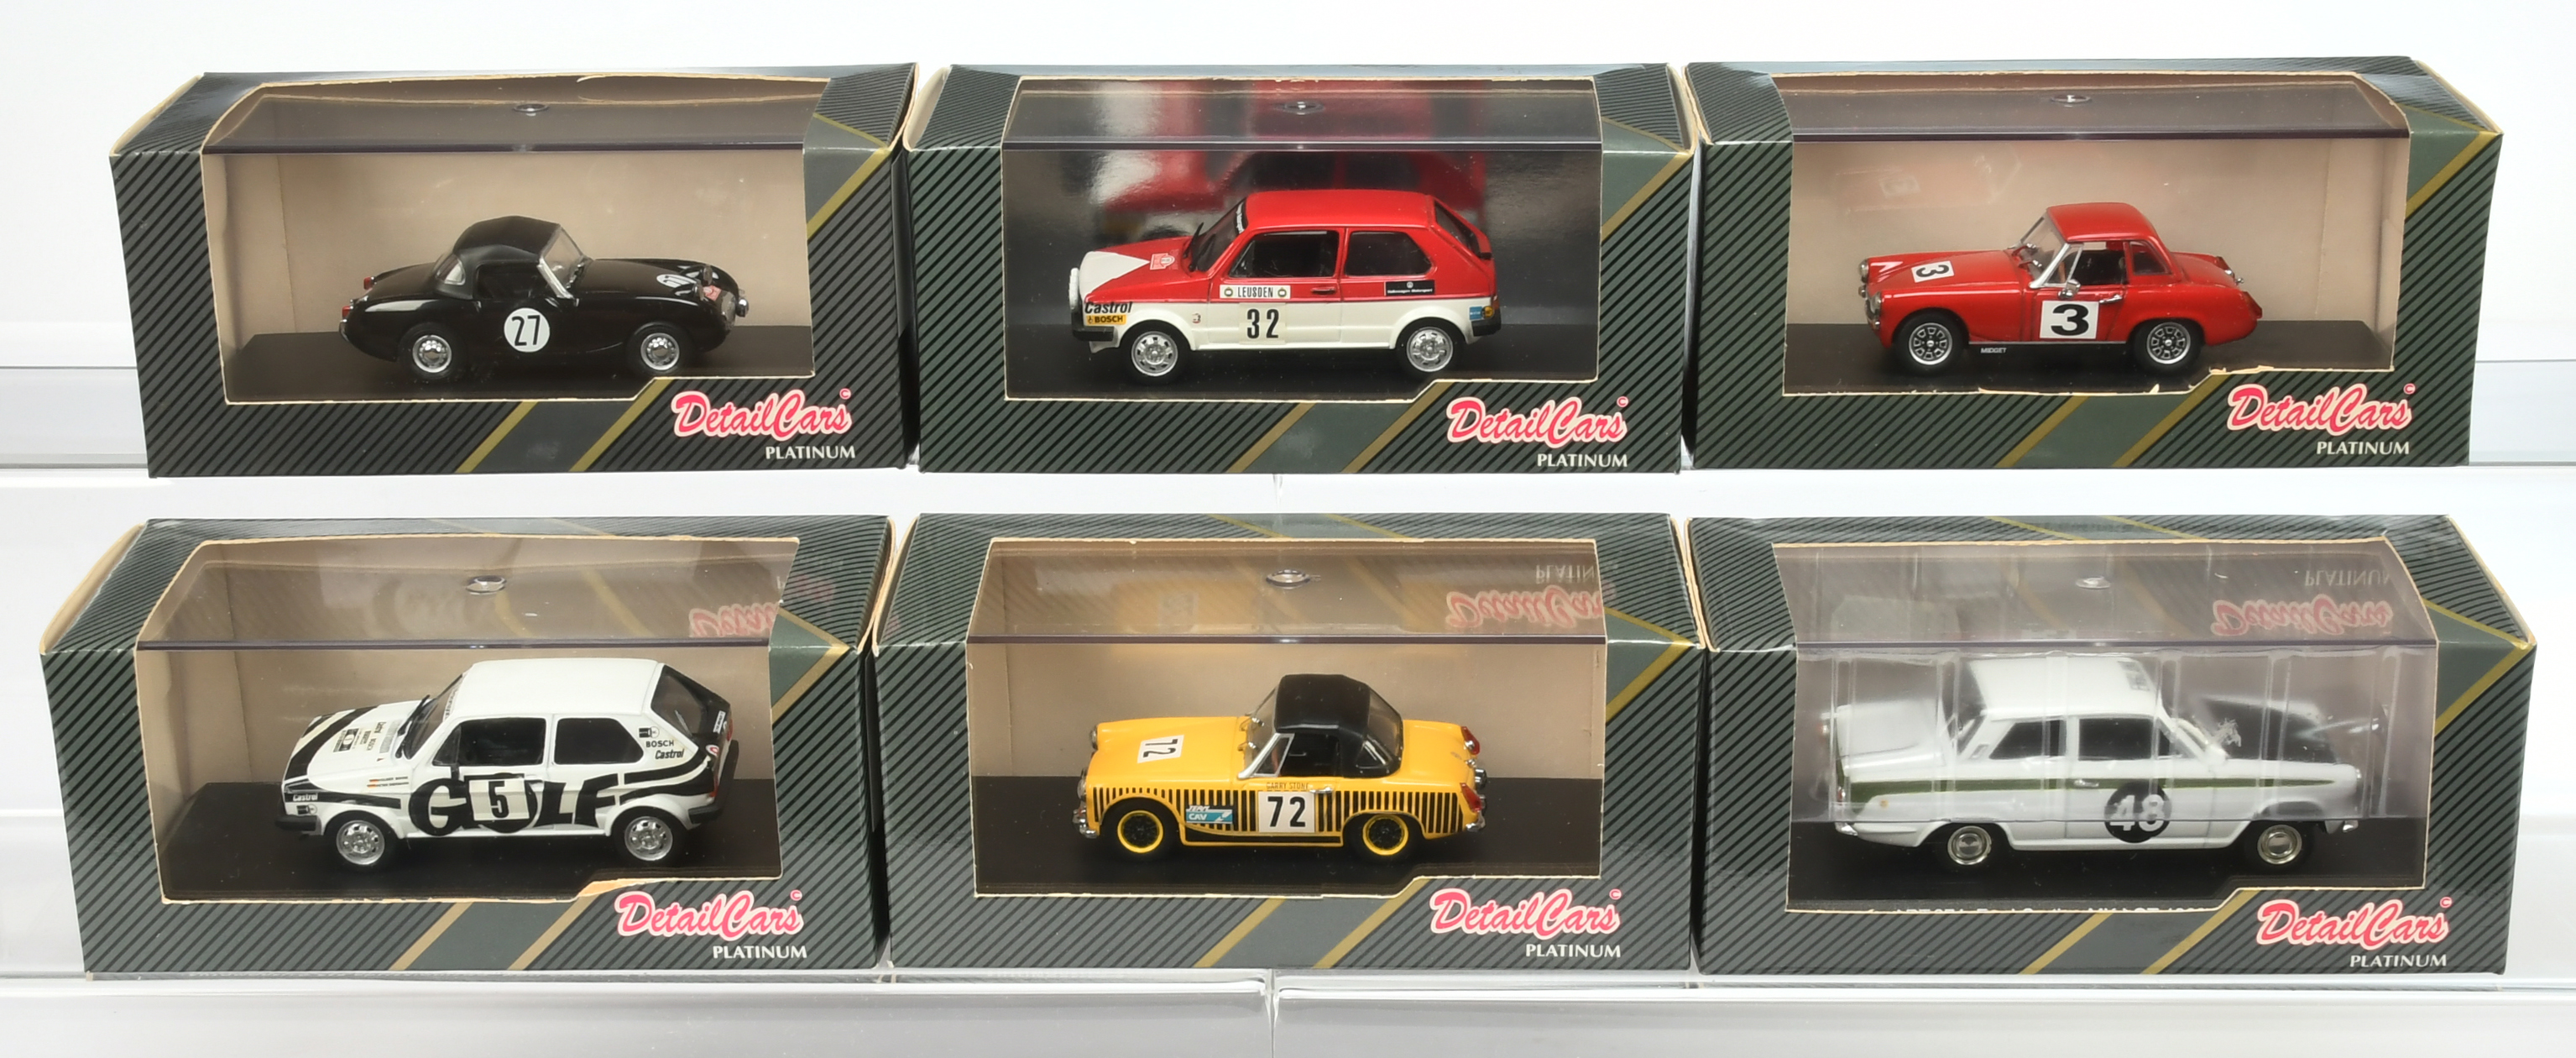 Detail Cars (1/43 Scale) a group of Ford Cortina, Volkswagen, M.G Midget 